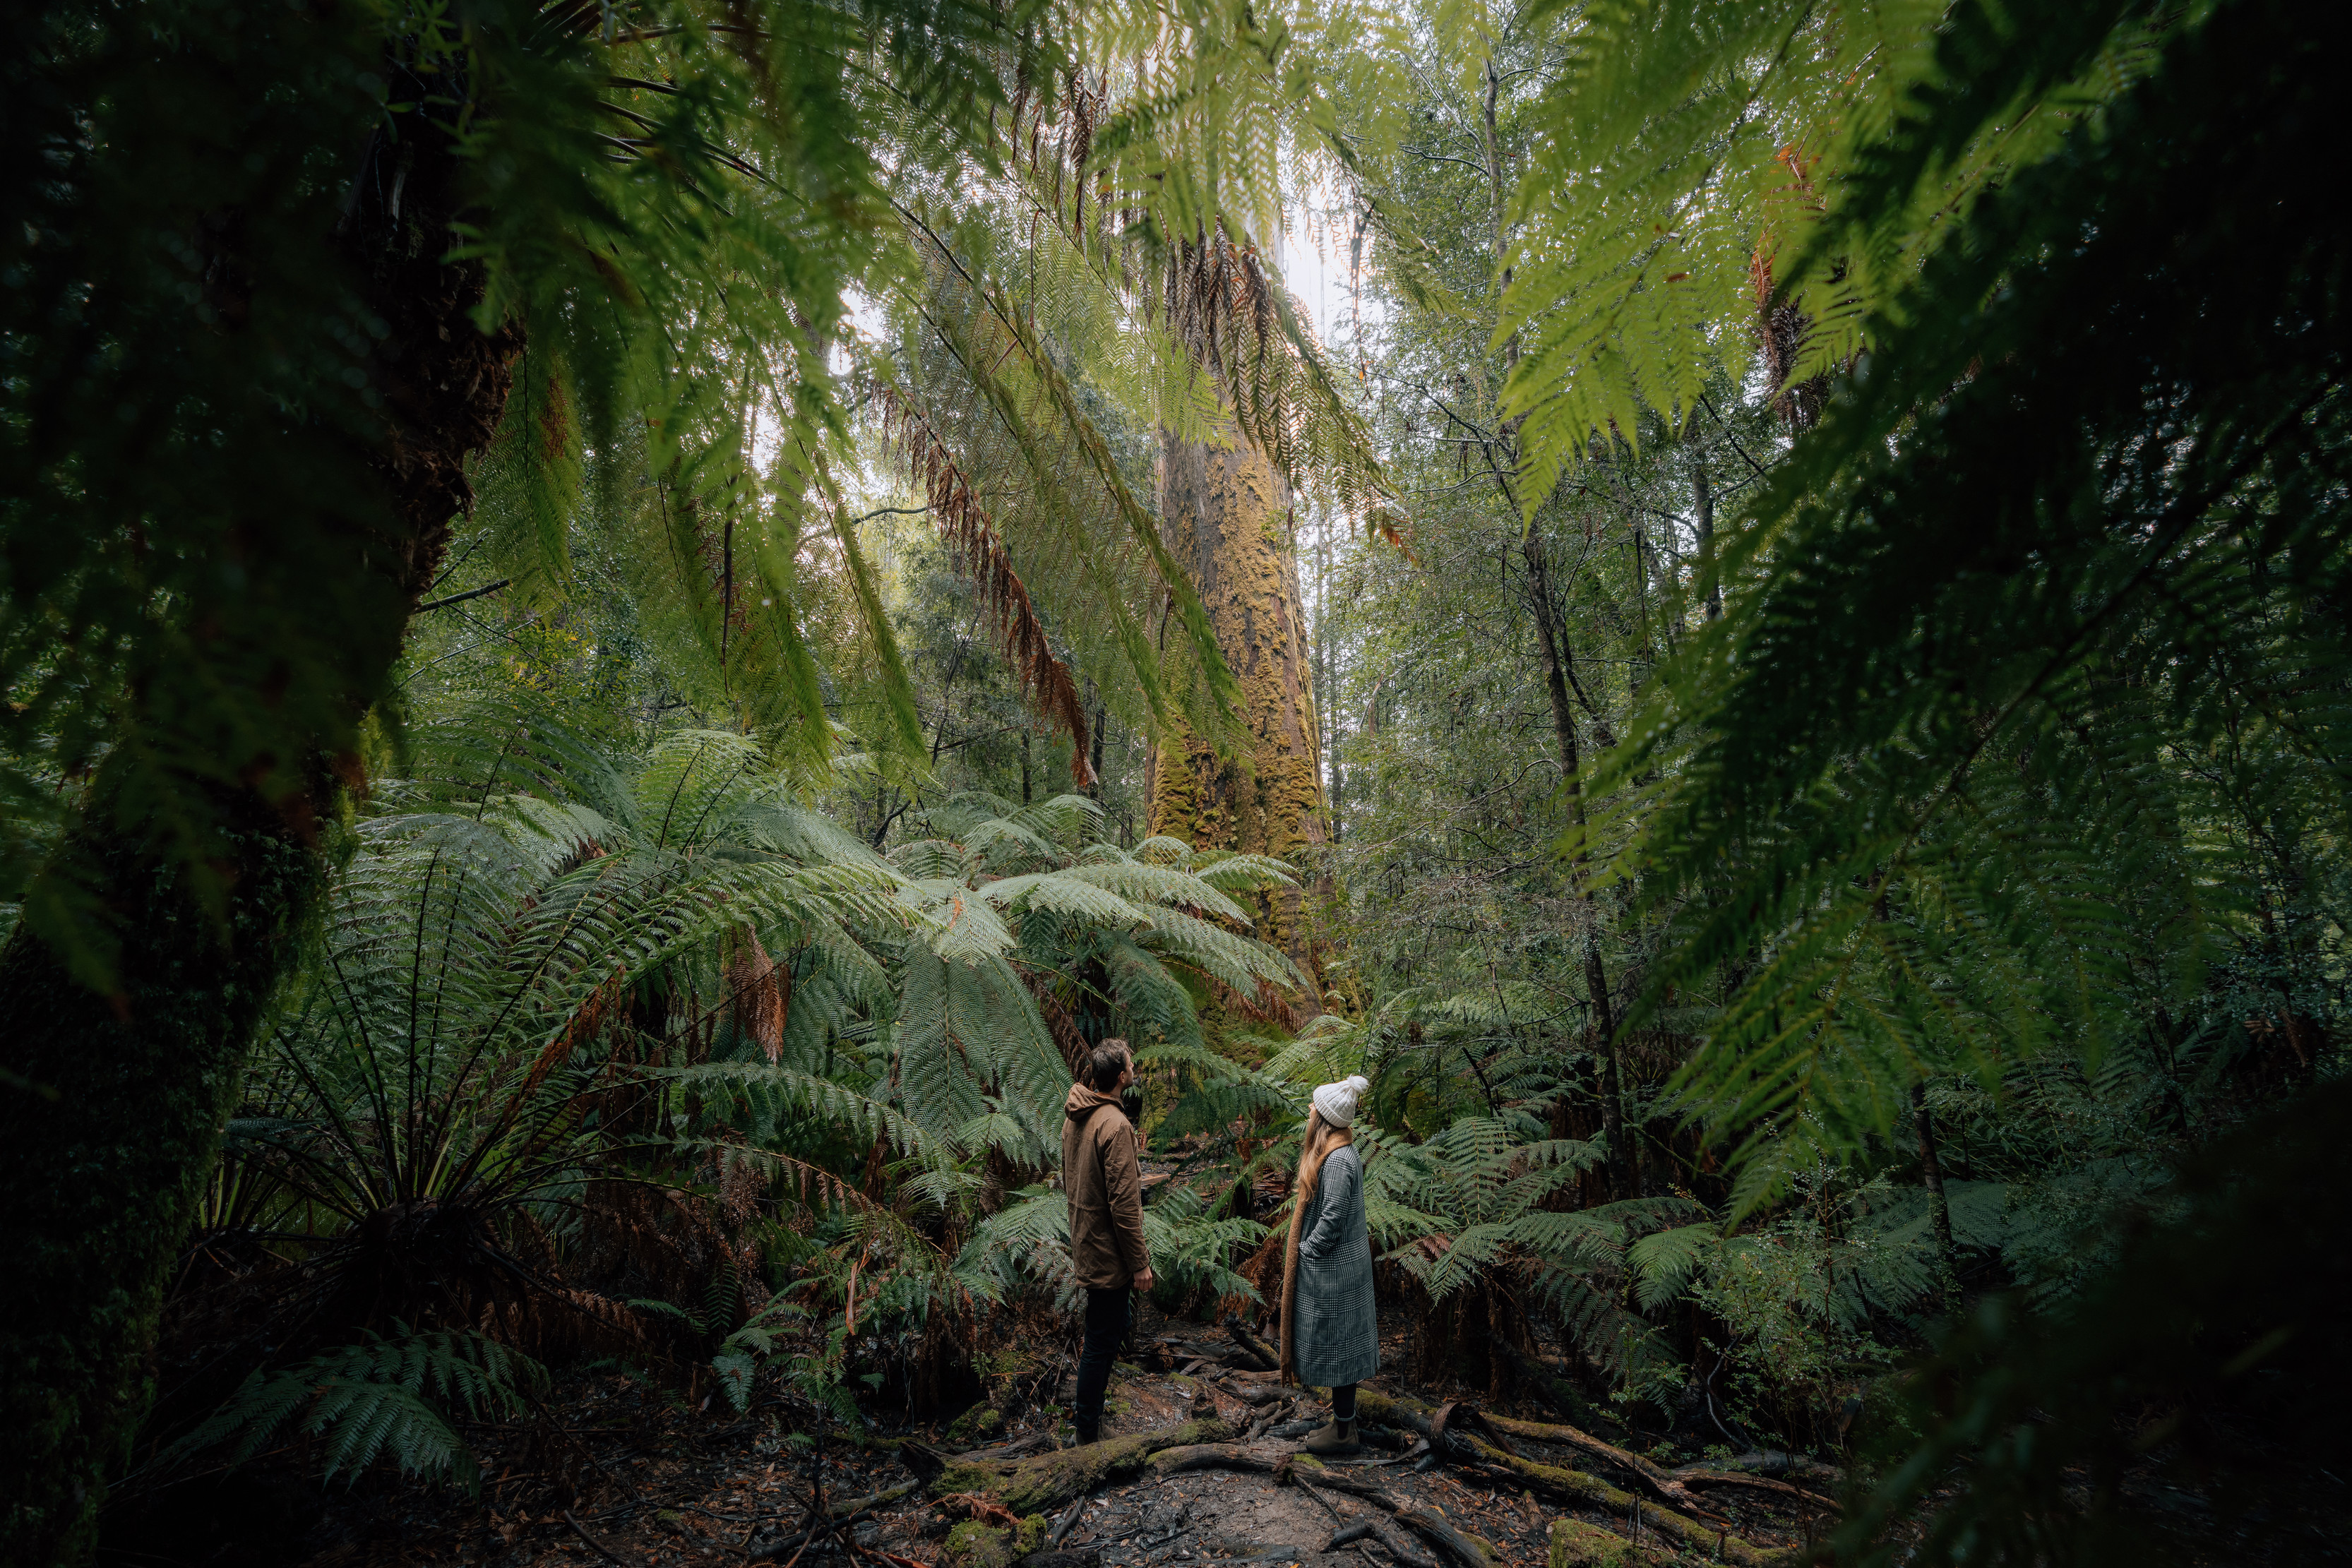 Dramatic wide angle image of a couple centered around the incredible Styx Valley, surrounded by dense ferns and tall trees.